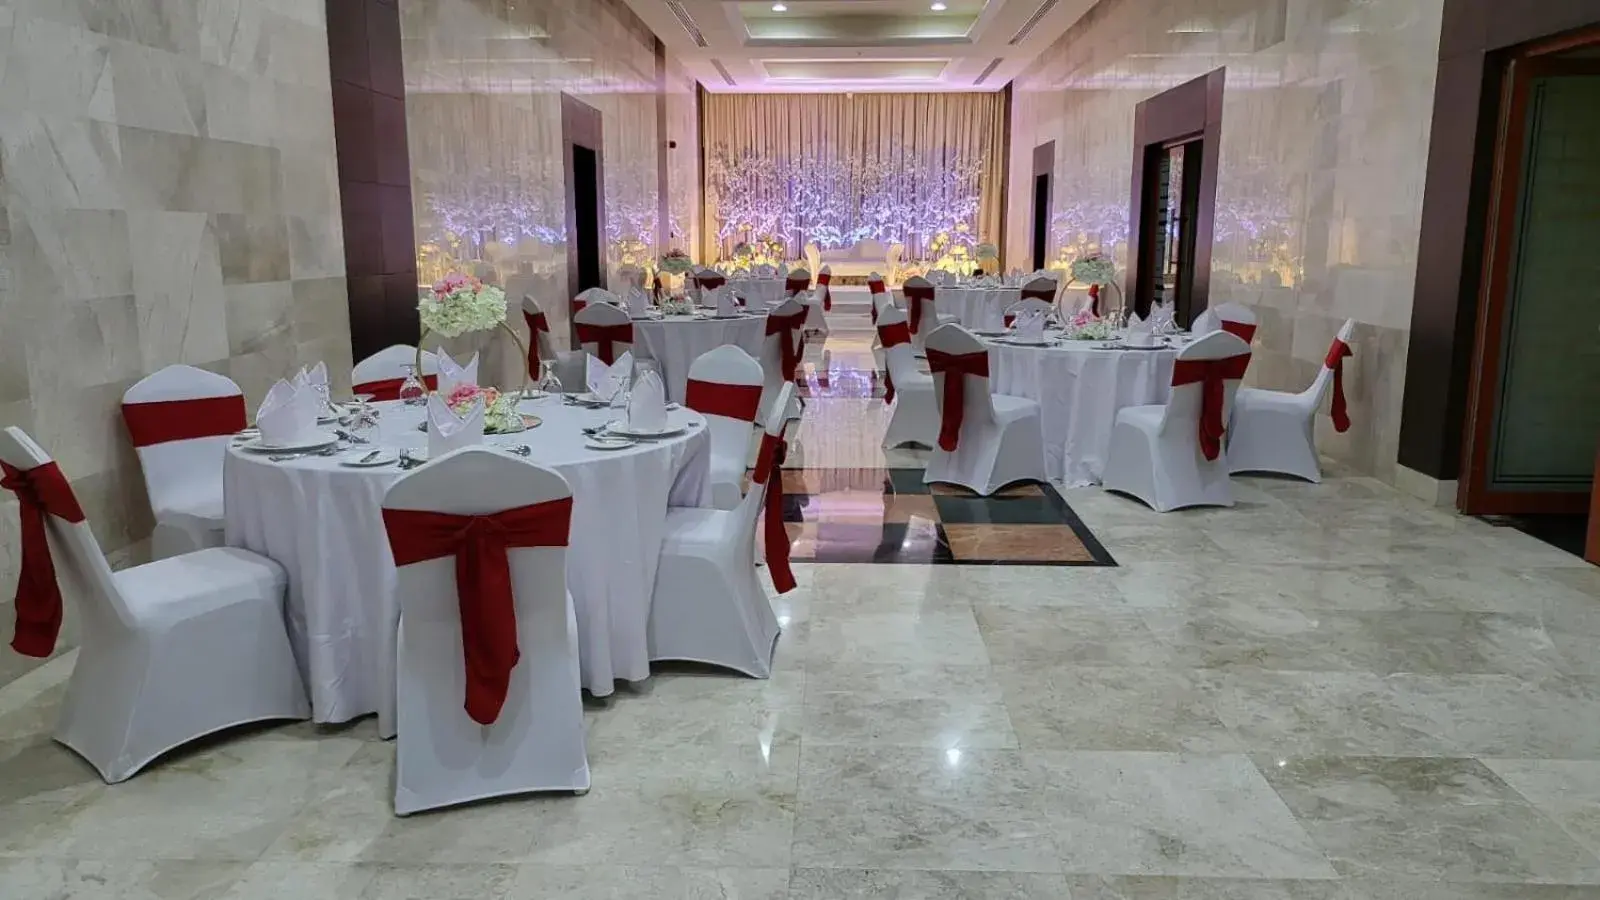 Banquet/Function facilities, Banquet Facilities in Red Castle Hotel - Managed by Aoudi Consultants